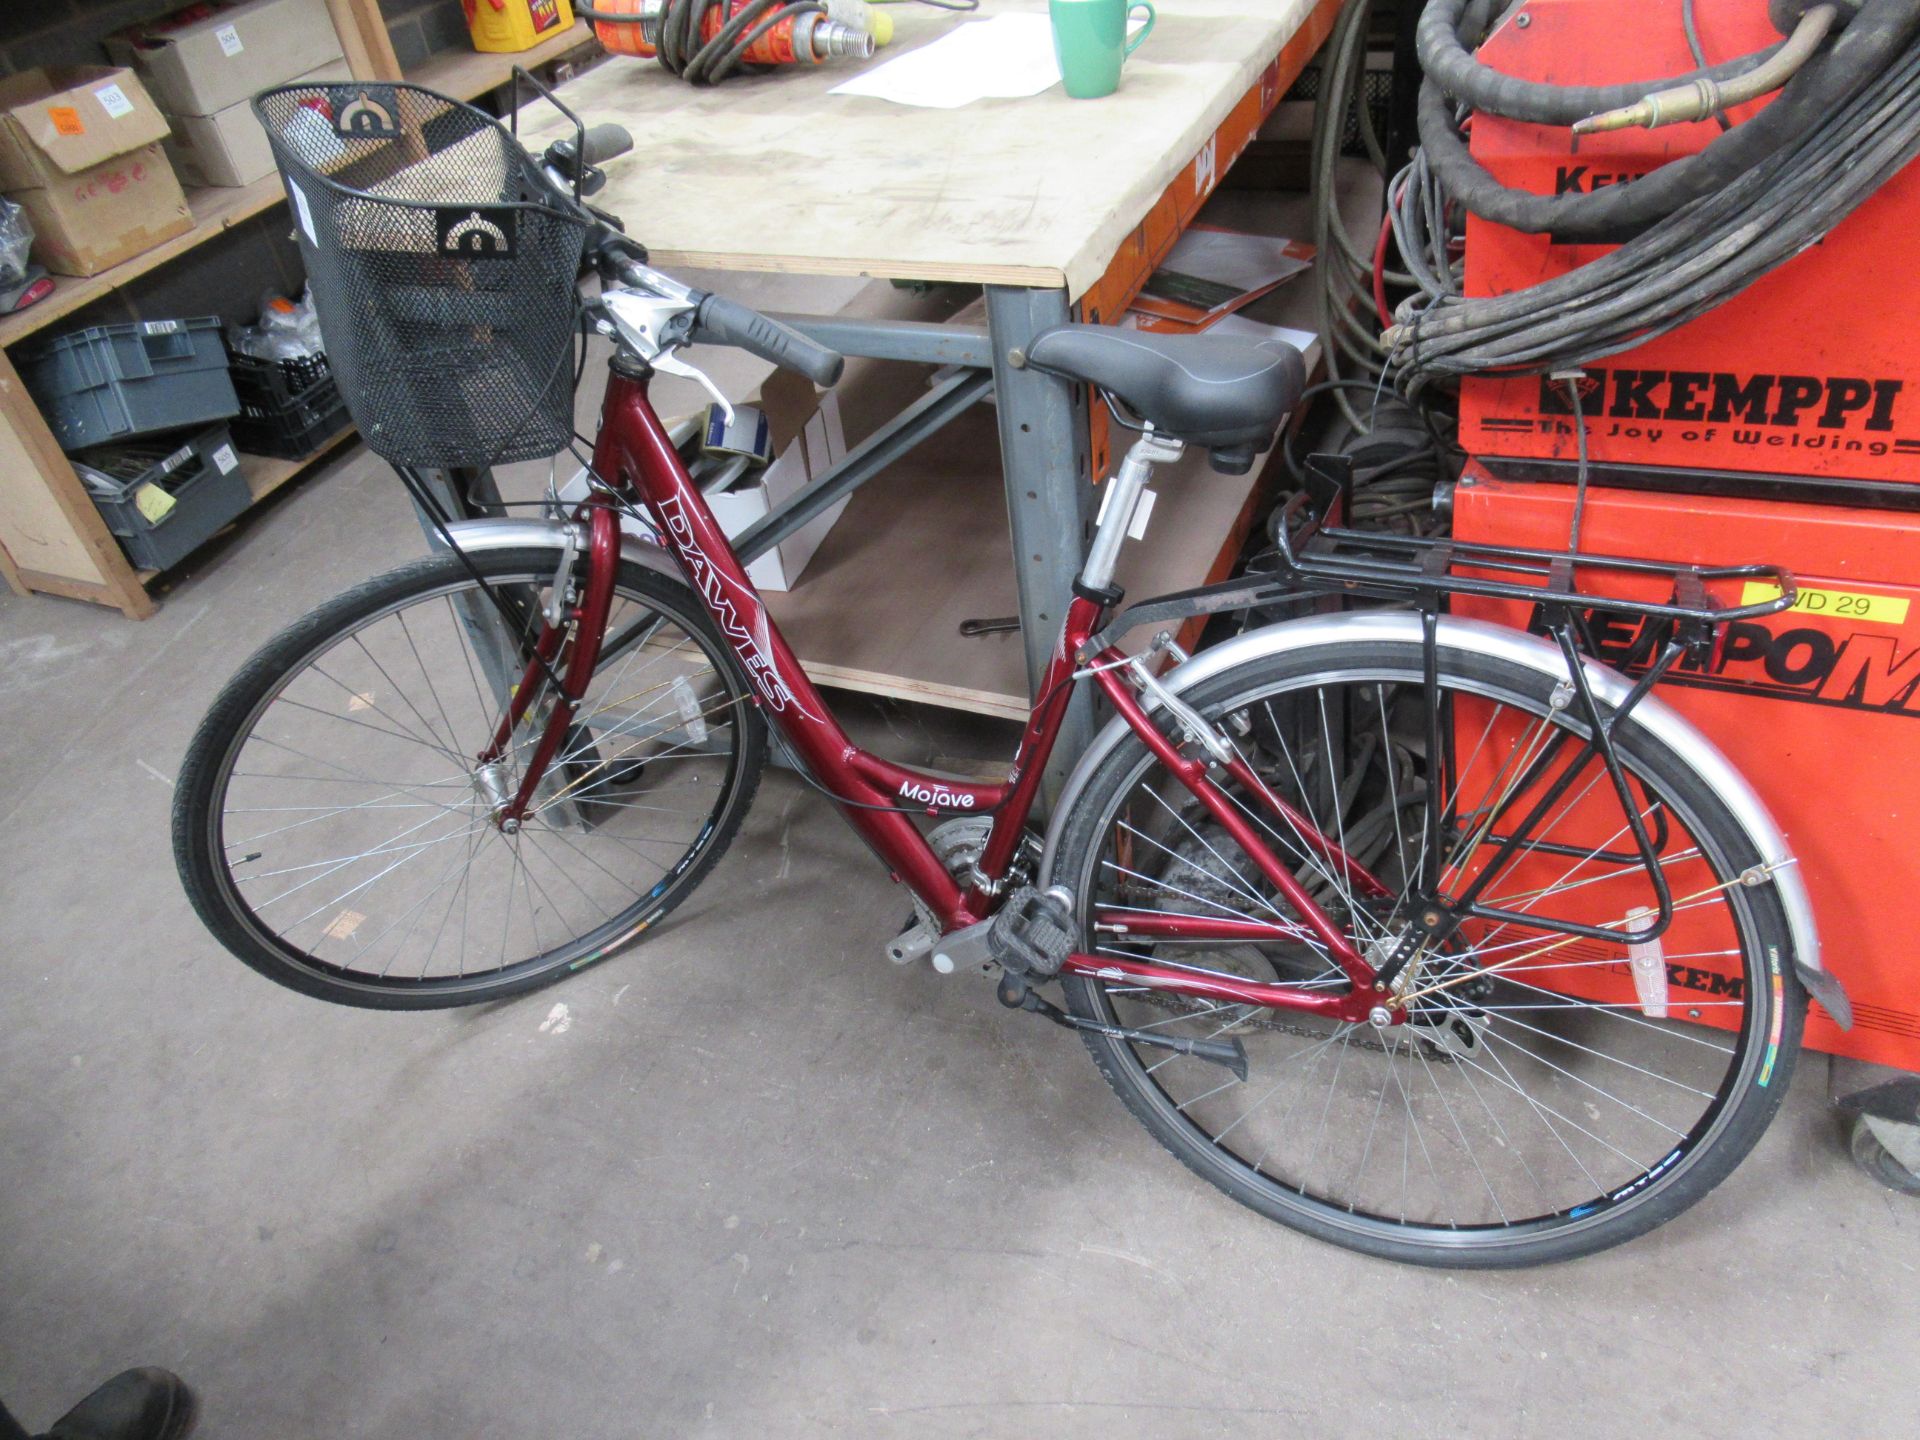 Dawes mojave bicycle with Shimano gears and front basket